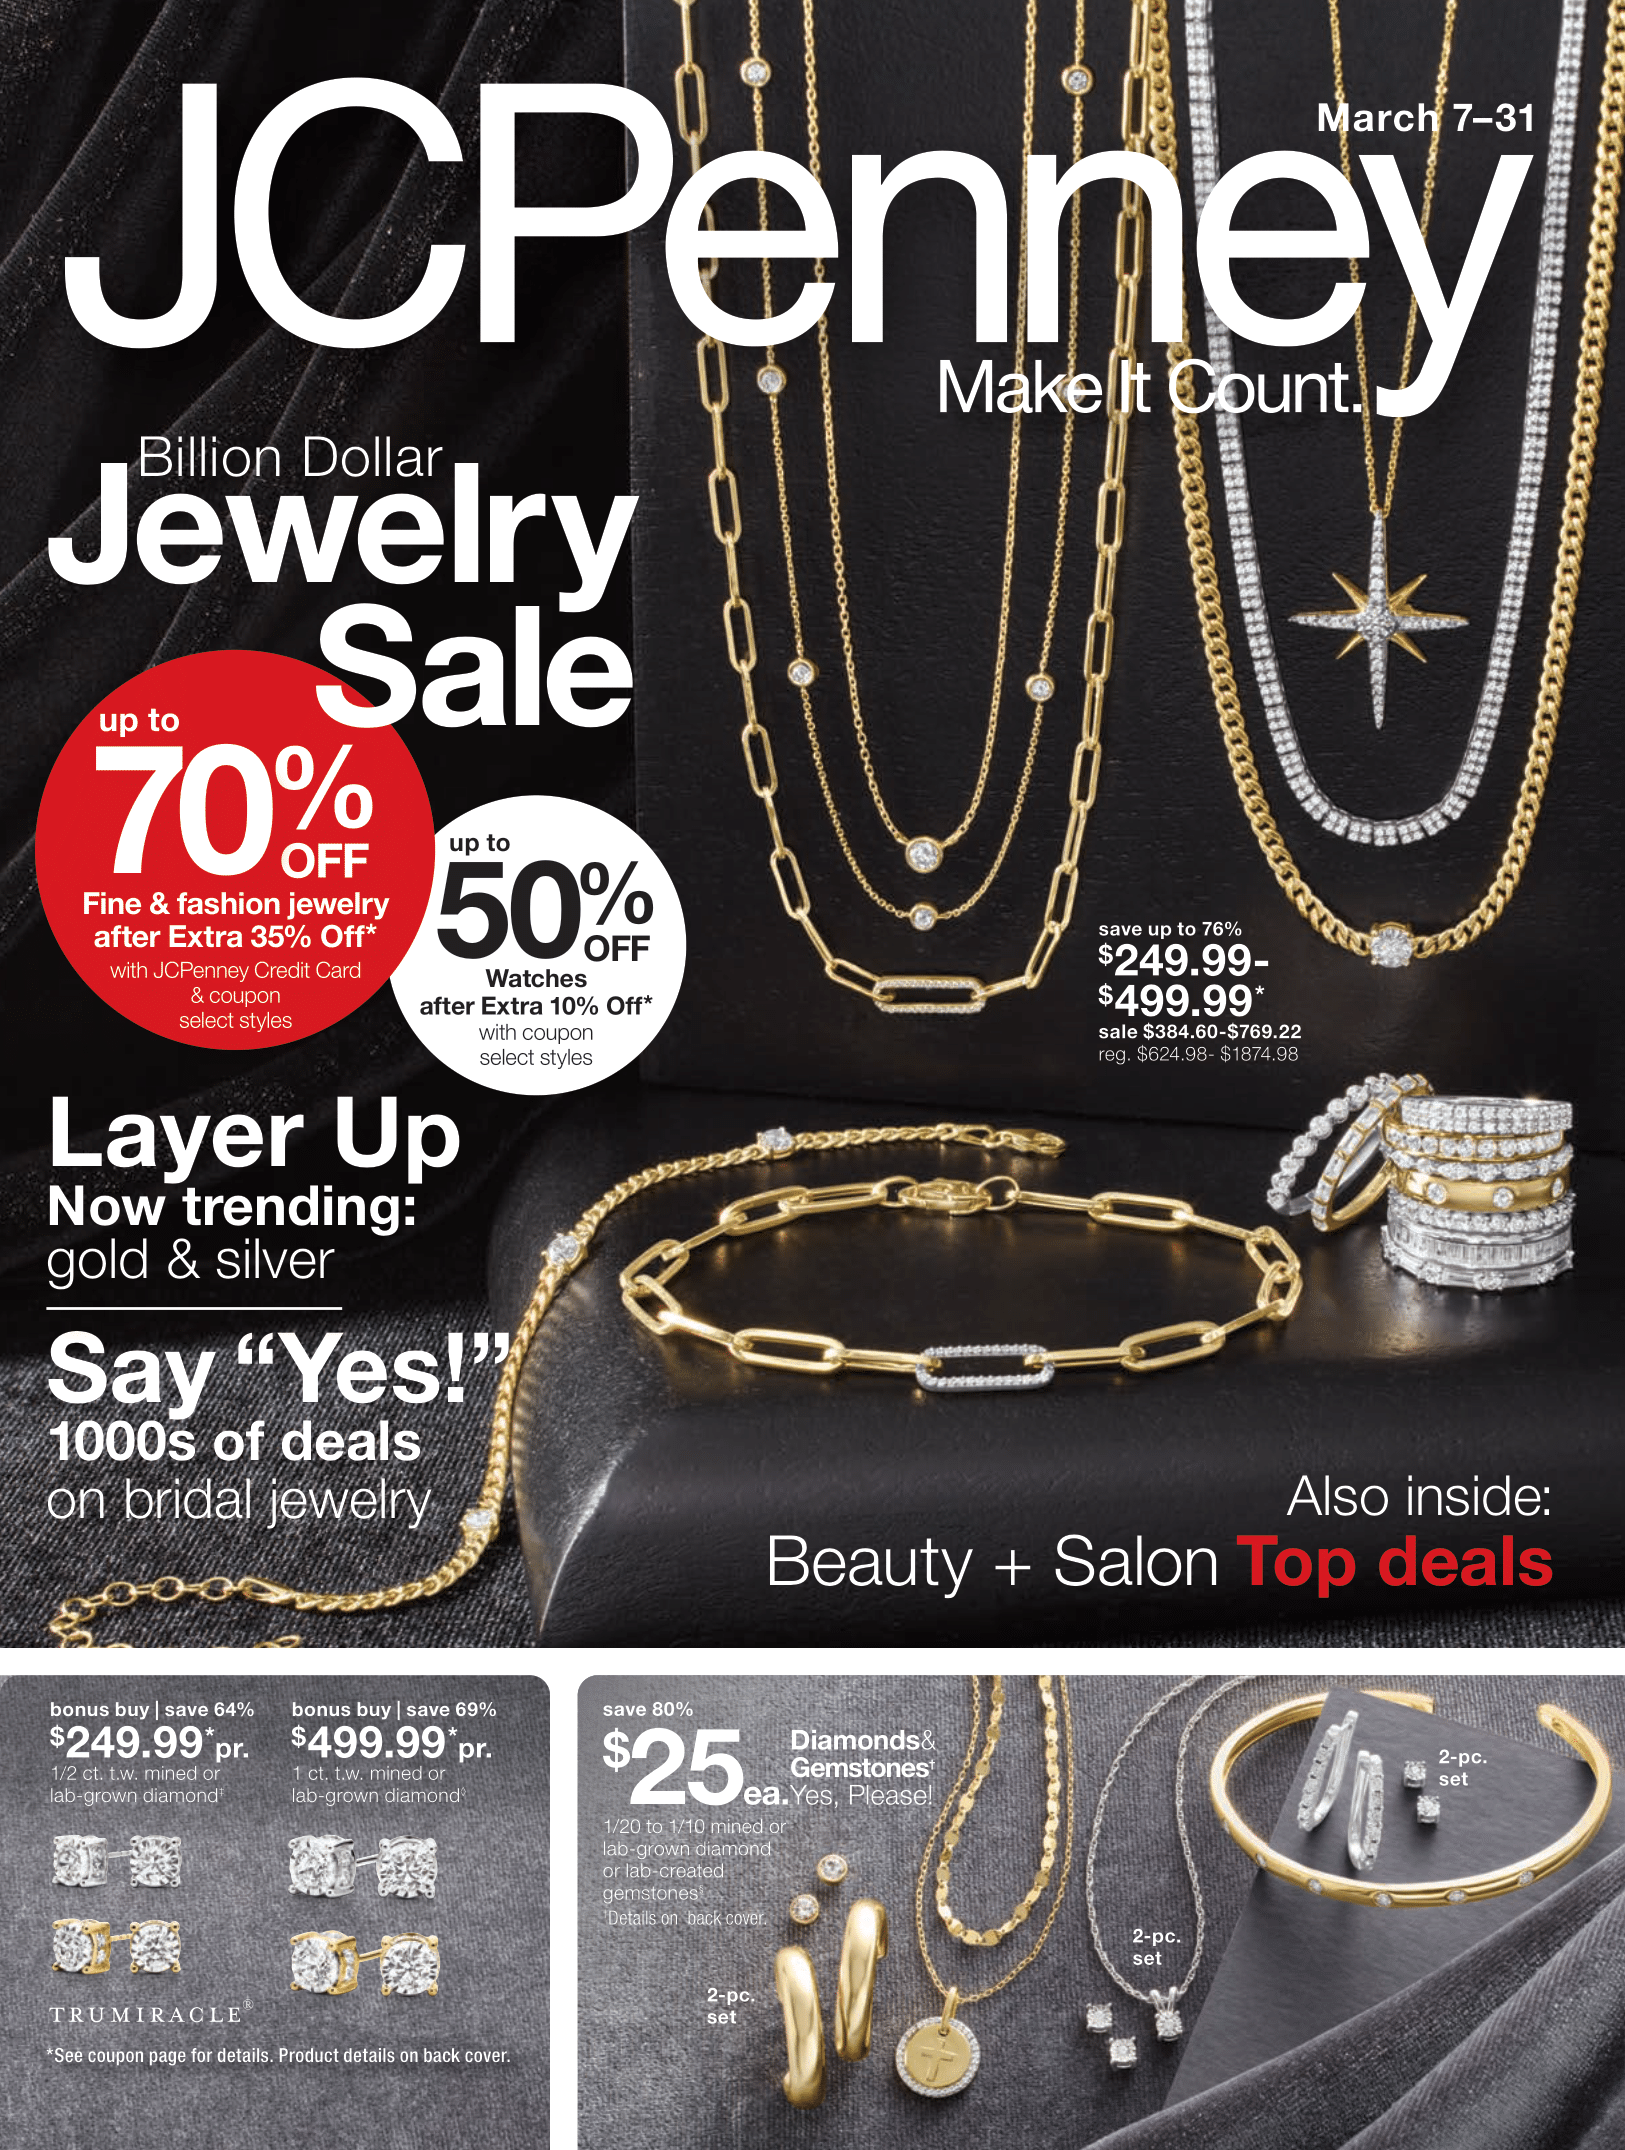 Billion Dollar Jewelry Sale at JCPenney. See store for more details.